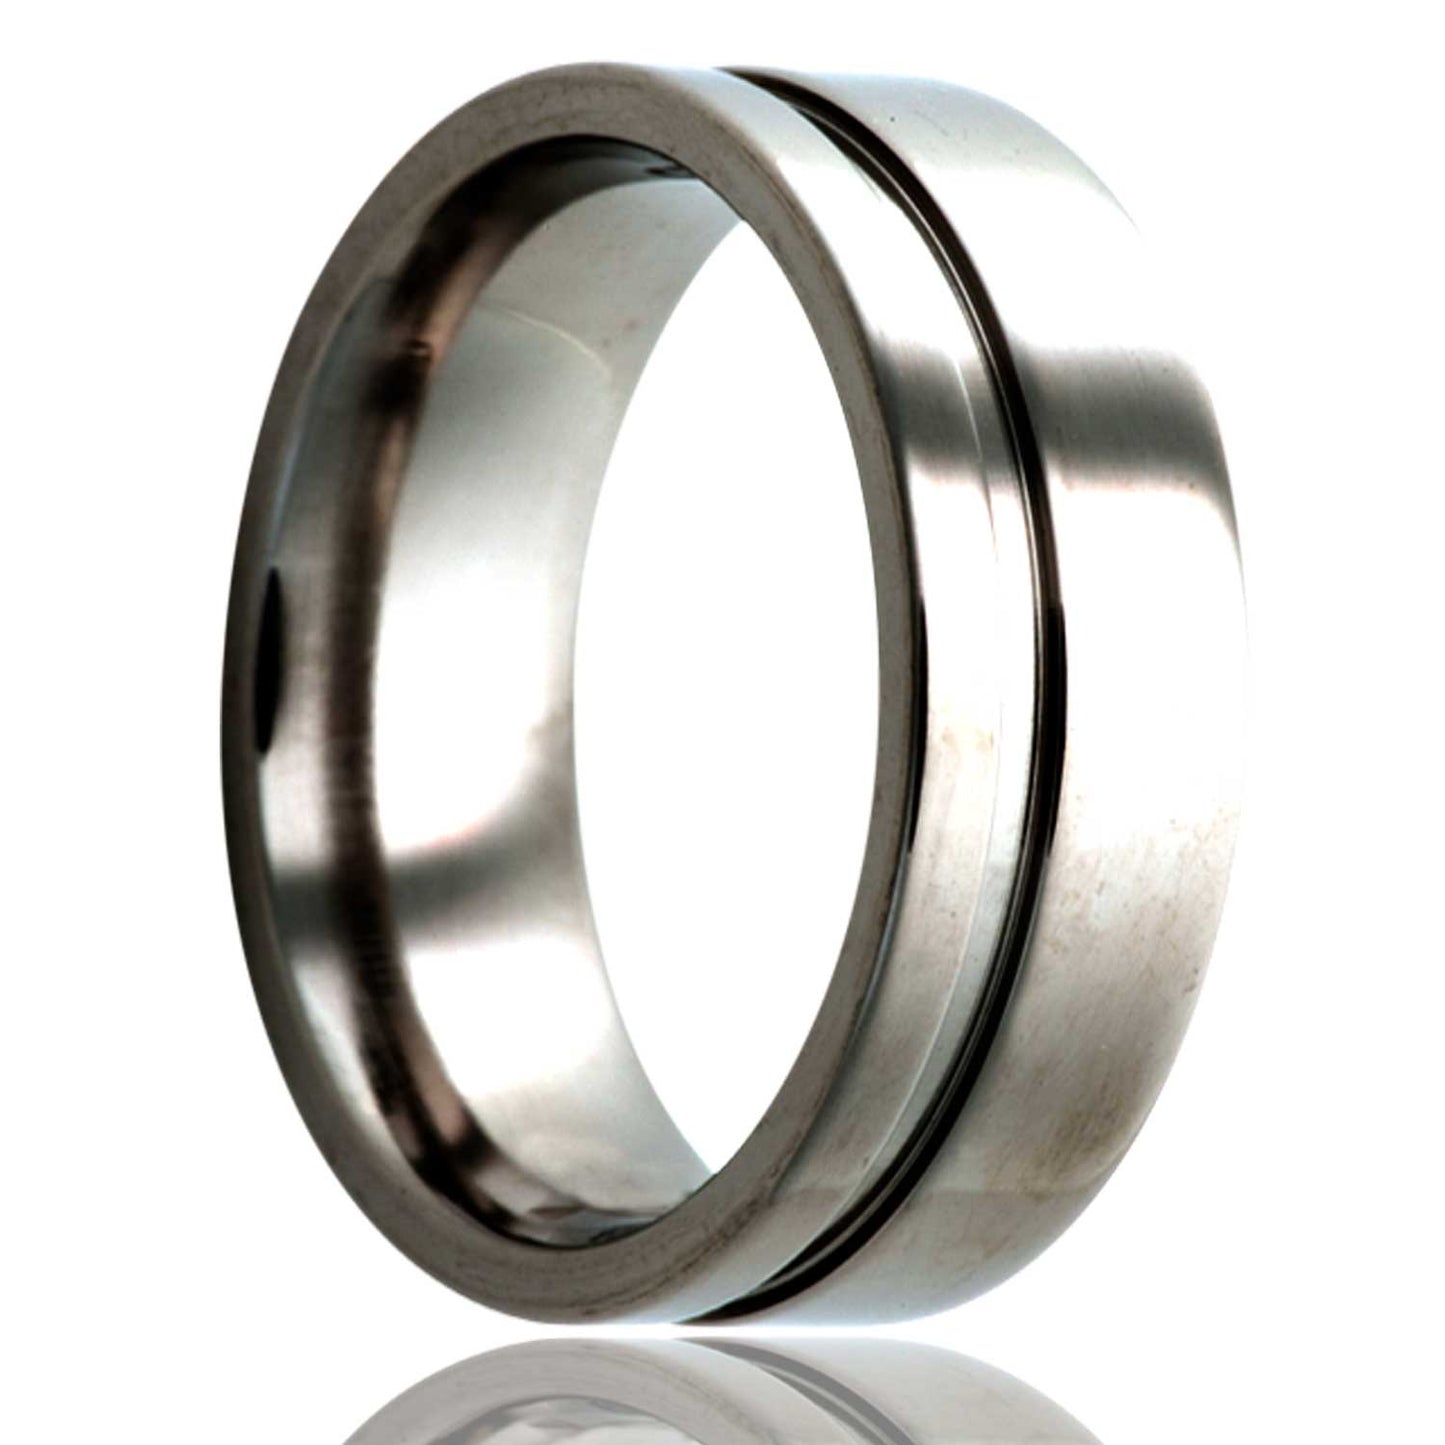 A asymmetrical grooved titanium wedding band displayed on a neutral white background.